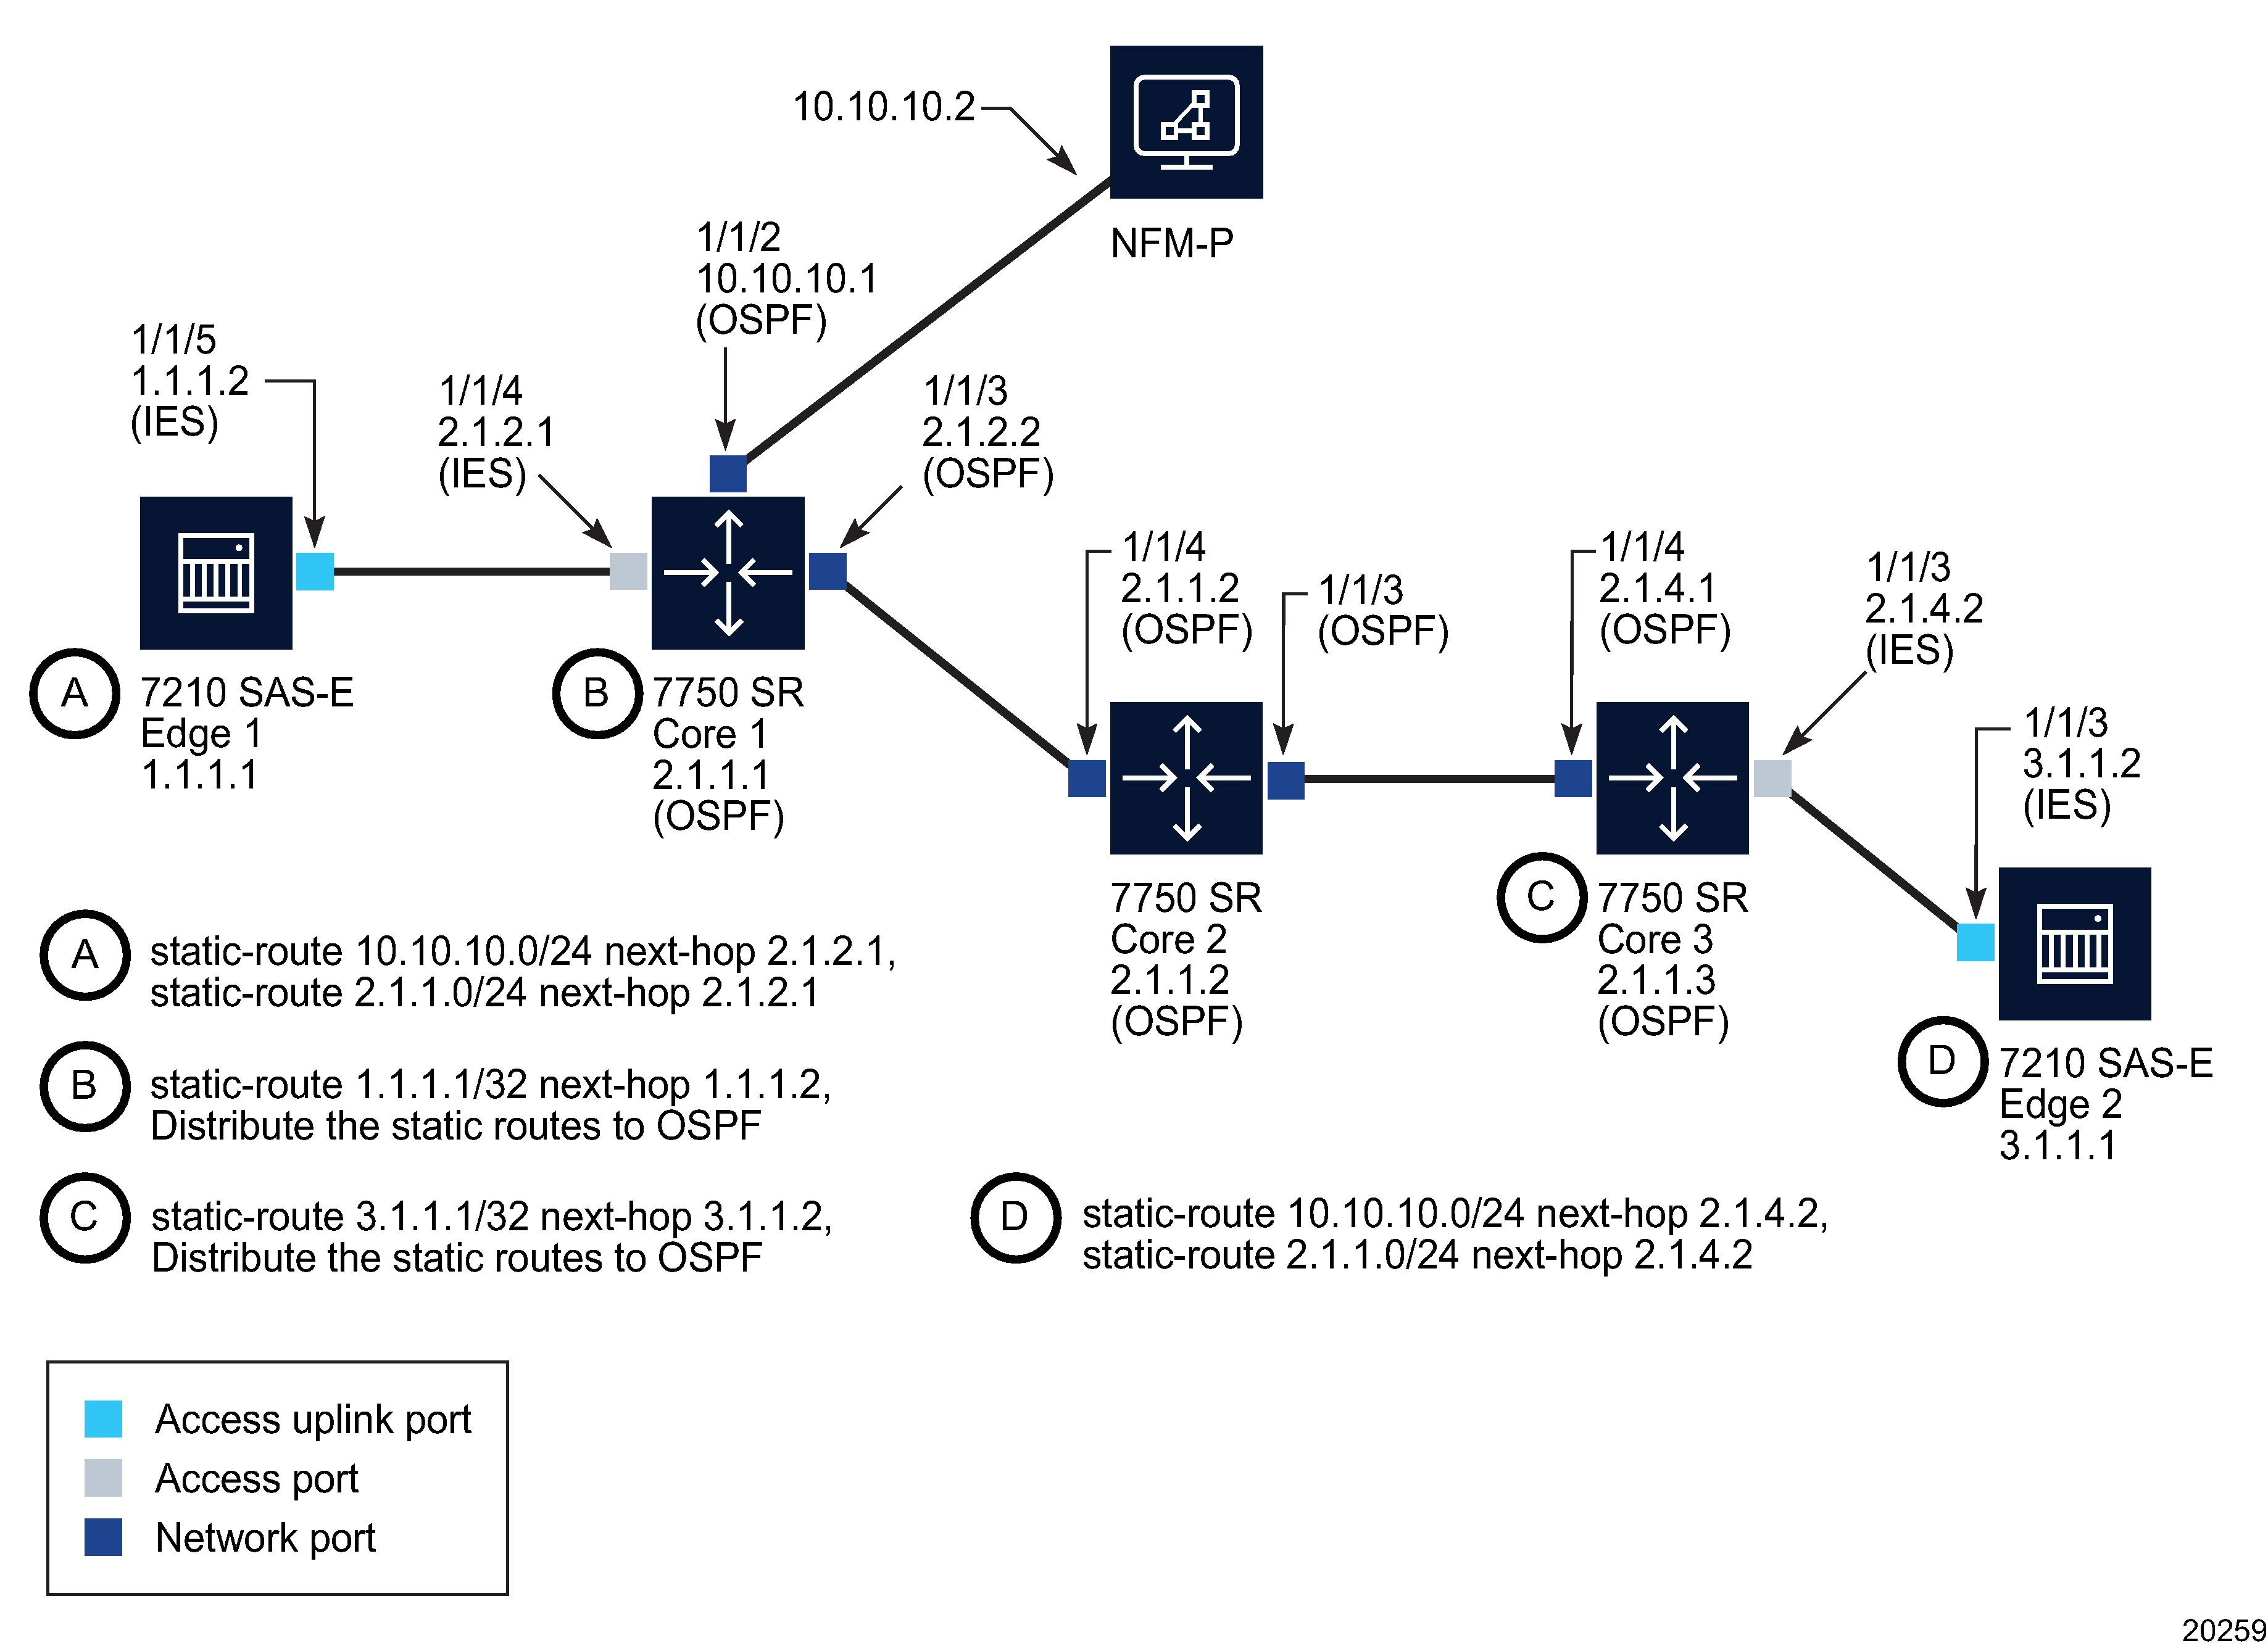 Example 7210 SAS-E in-band management network